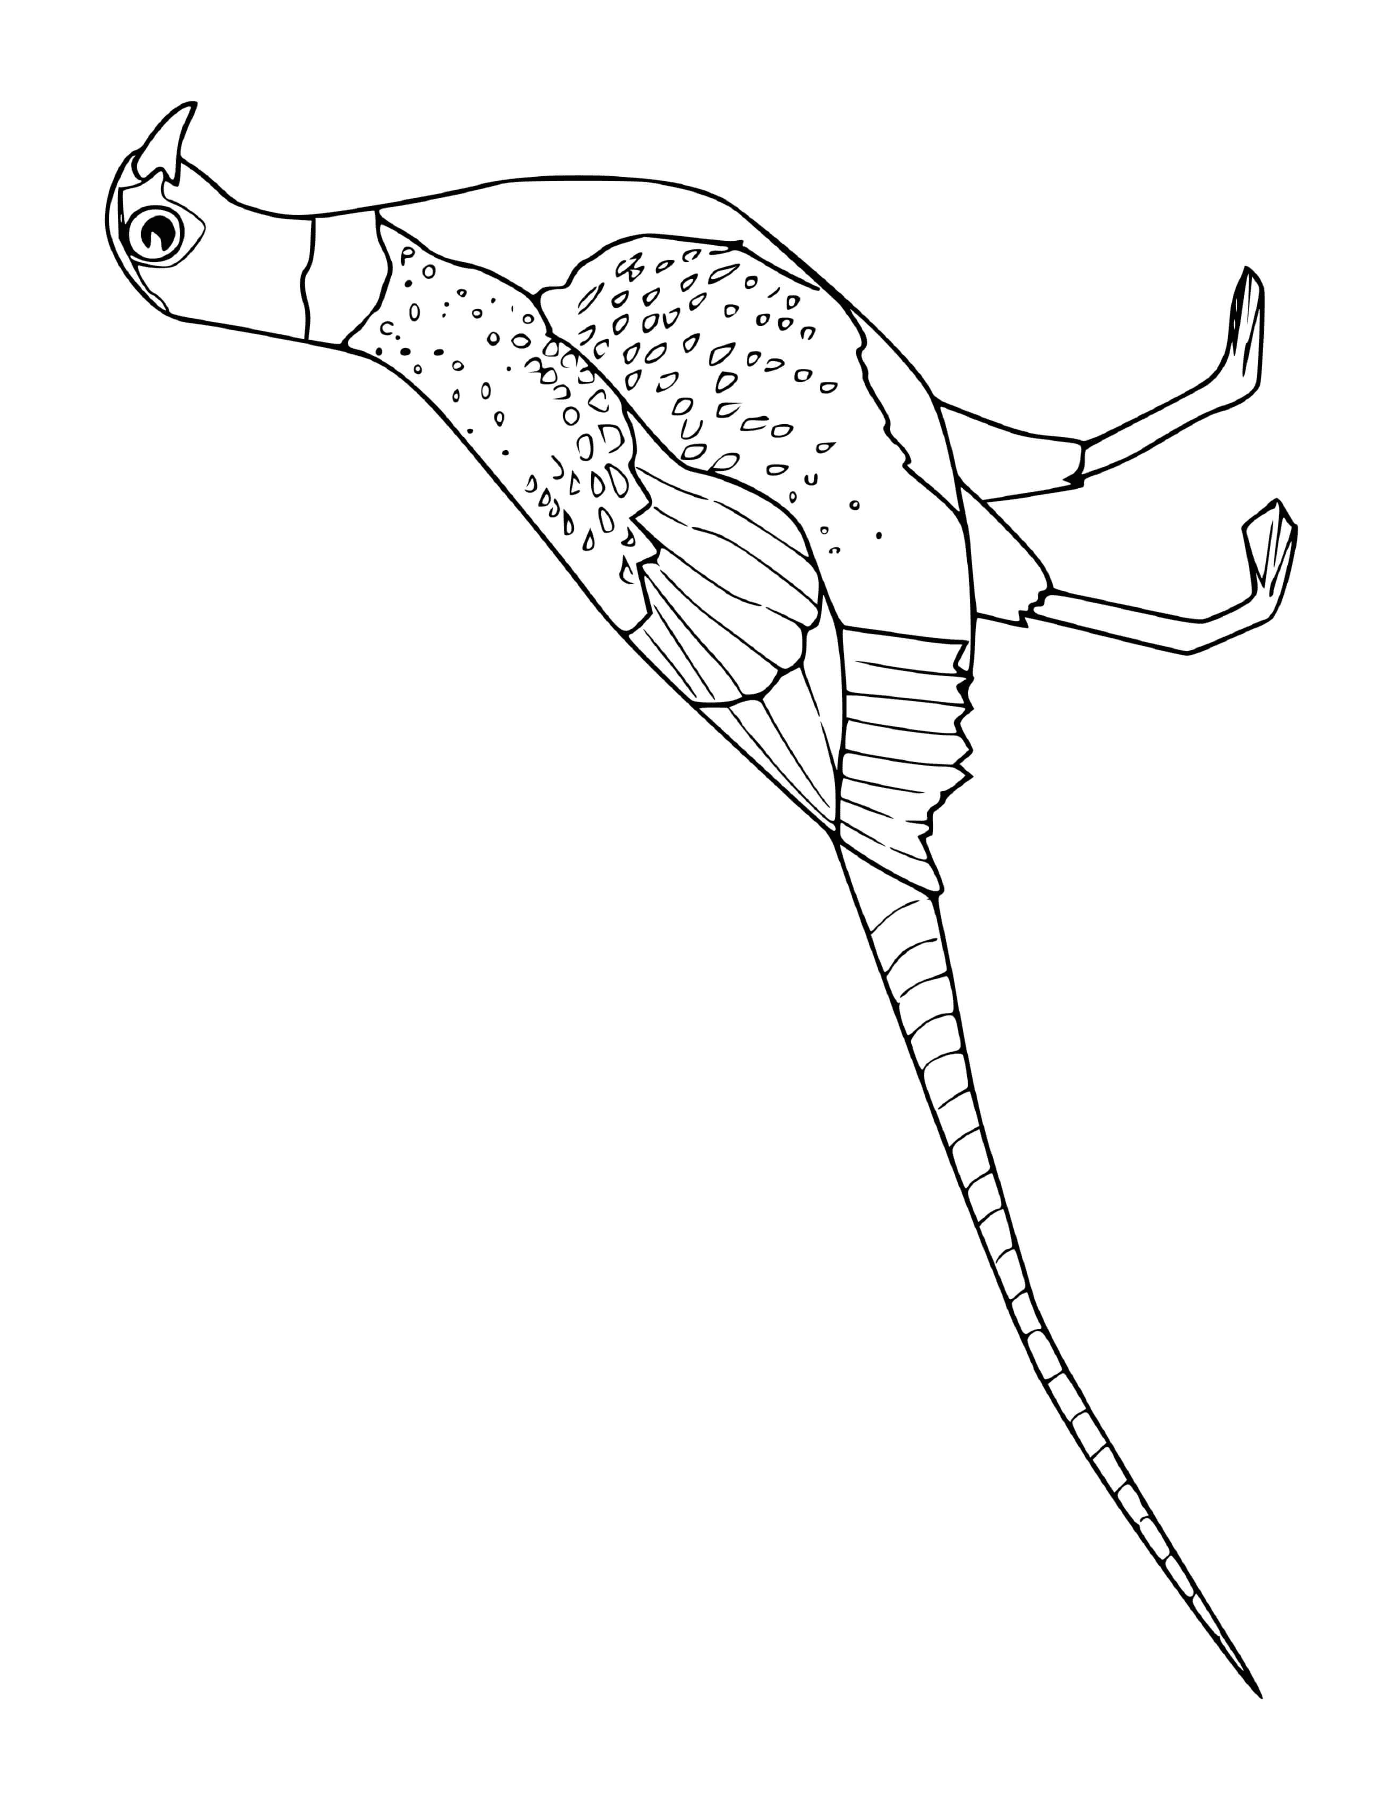  Lizard with a long tail 